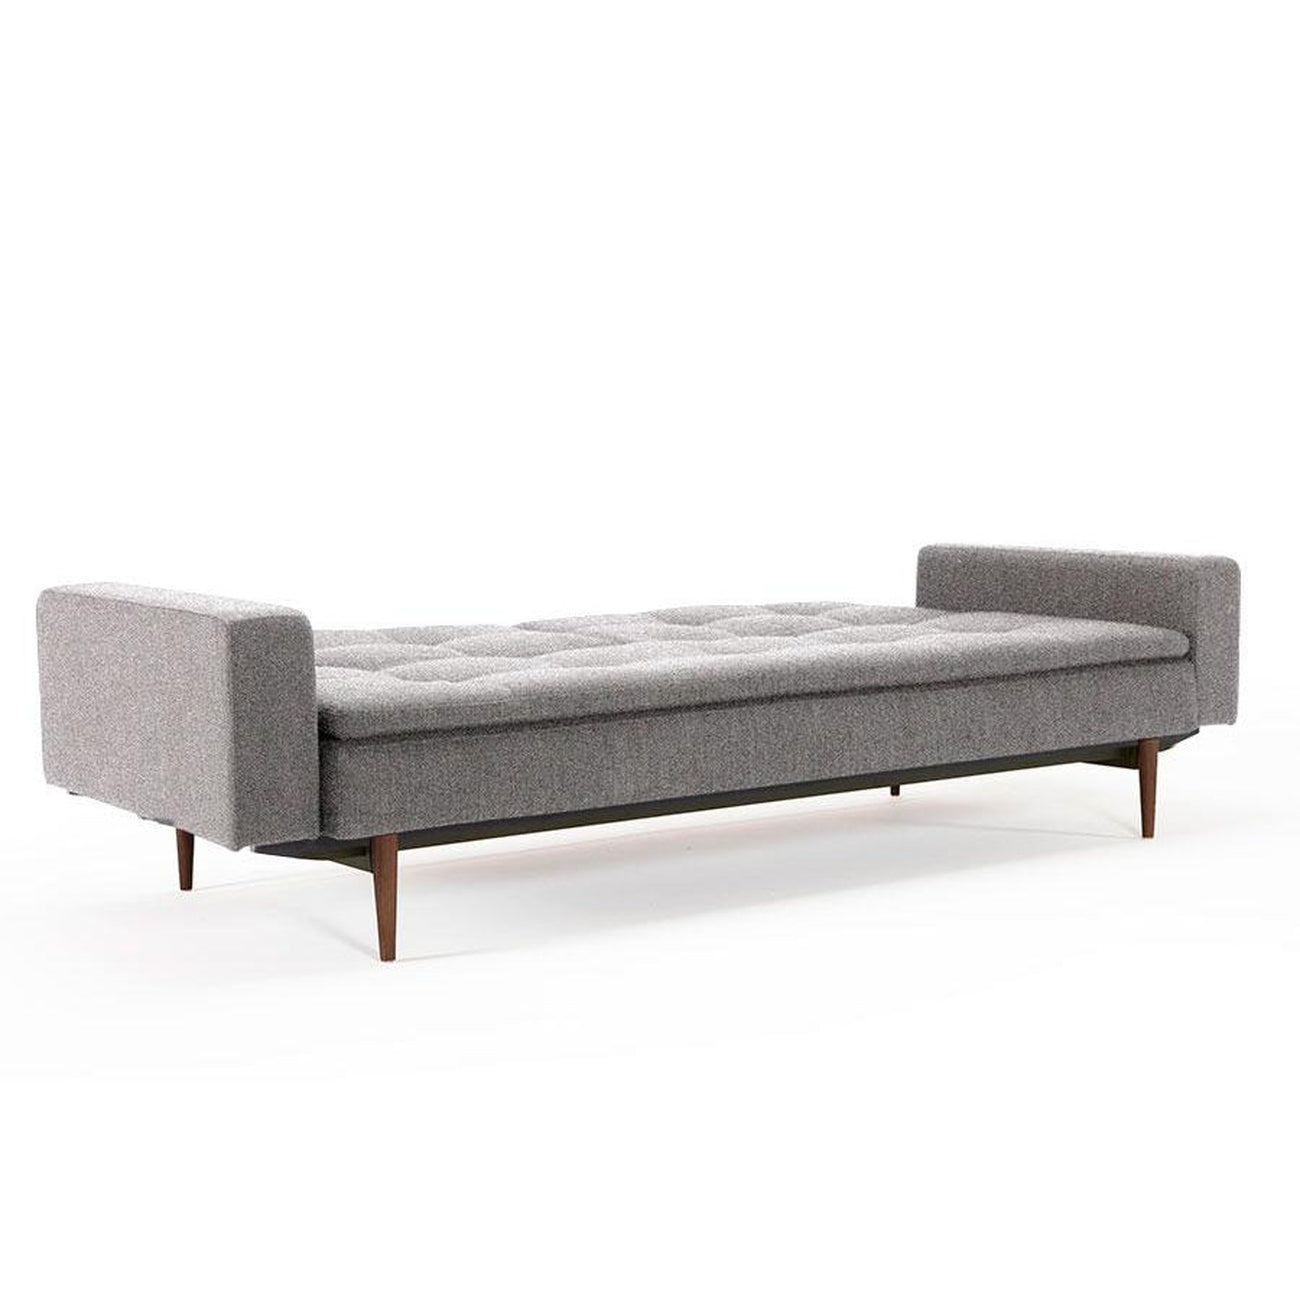 Dublexo Deluxe Sofa W/Arms,DARK WOOD-Innovation Living-INNO-94-741050020527-10-3-SofasMixed Dance Natural-12-France and Son